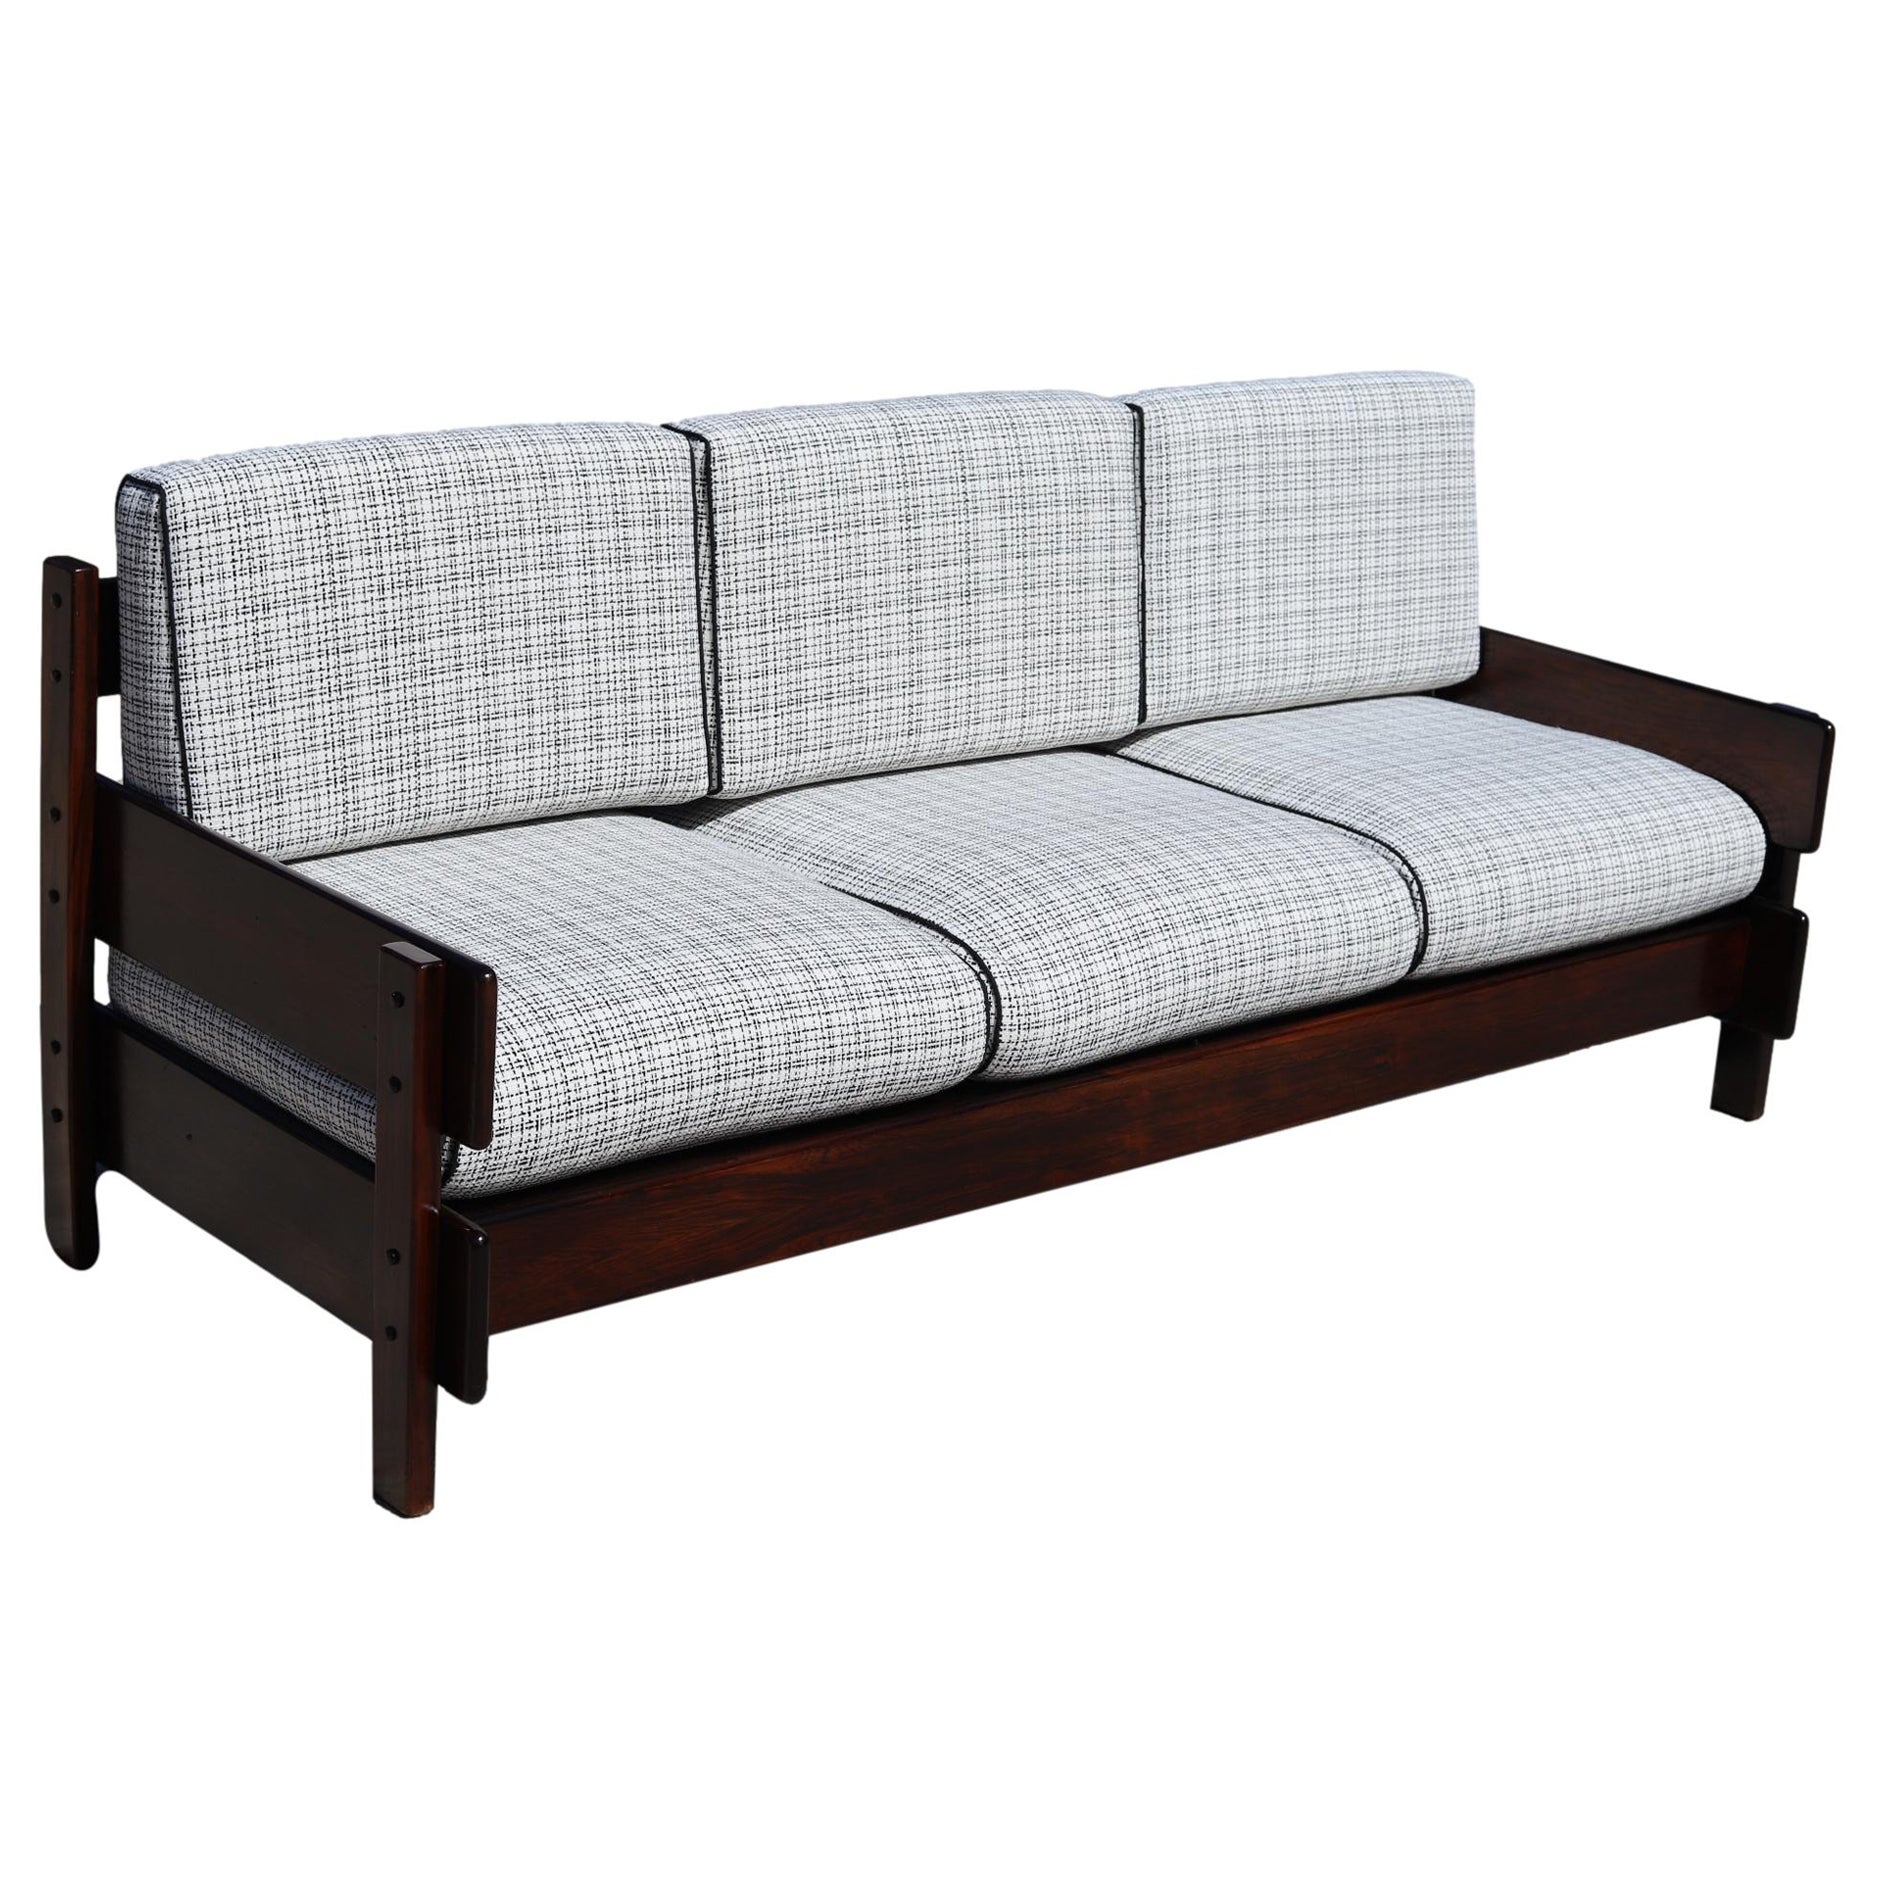 Brazilian Rosewood Sofa in Leather and Linen, Circa 60' For Sale